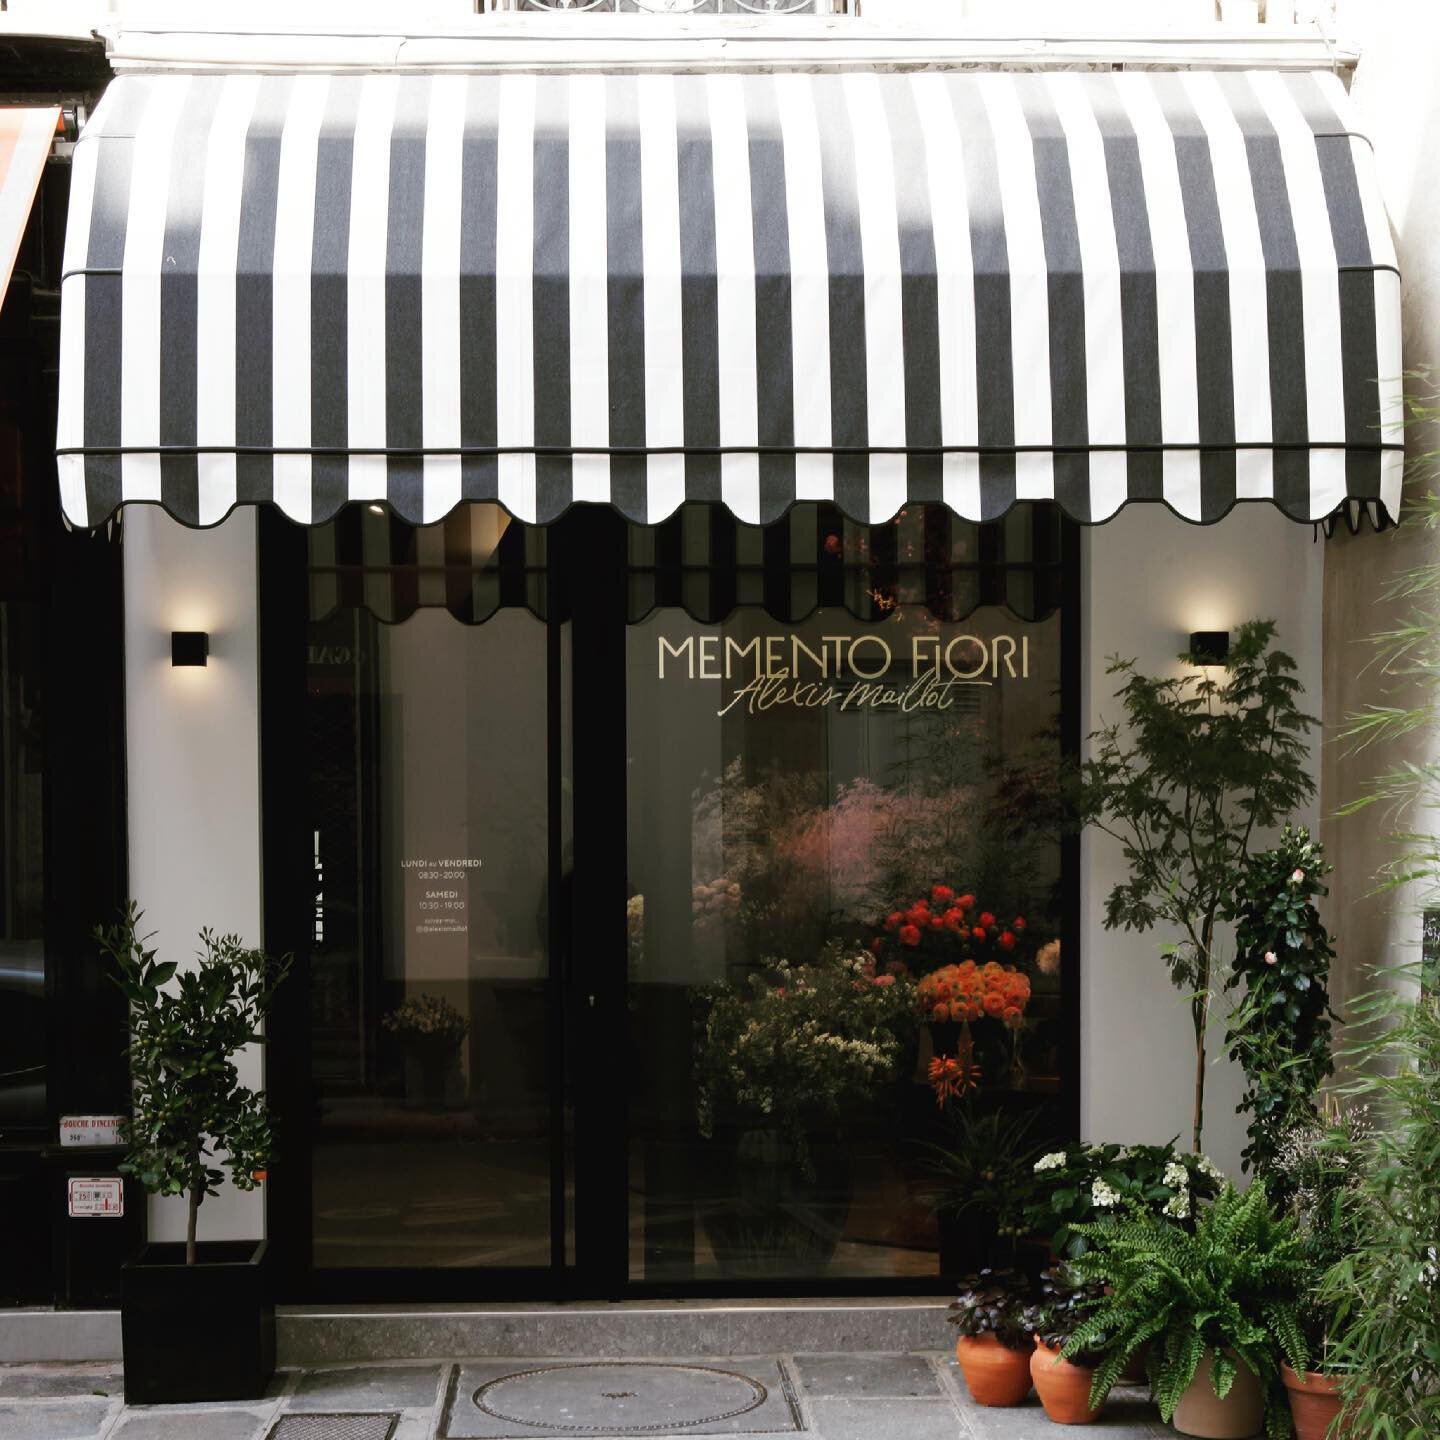 It&rsquo;s done and and we&rsquo;re proud... full concept from head to toe thanks for the trust @alexismaillot, let&rsquo;s make people scream MEMENTO FIORI , 36 rue de Penthi&egrave;vre, 75008 Paris

.
.
.
.
.
Photo credit : @alexandrameurant
.
.
.
